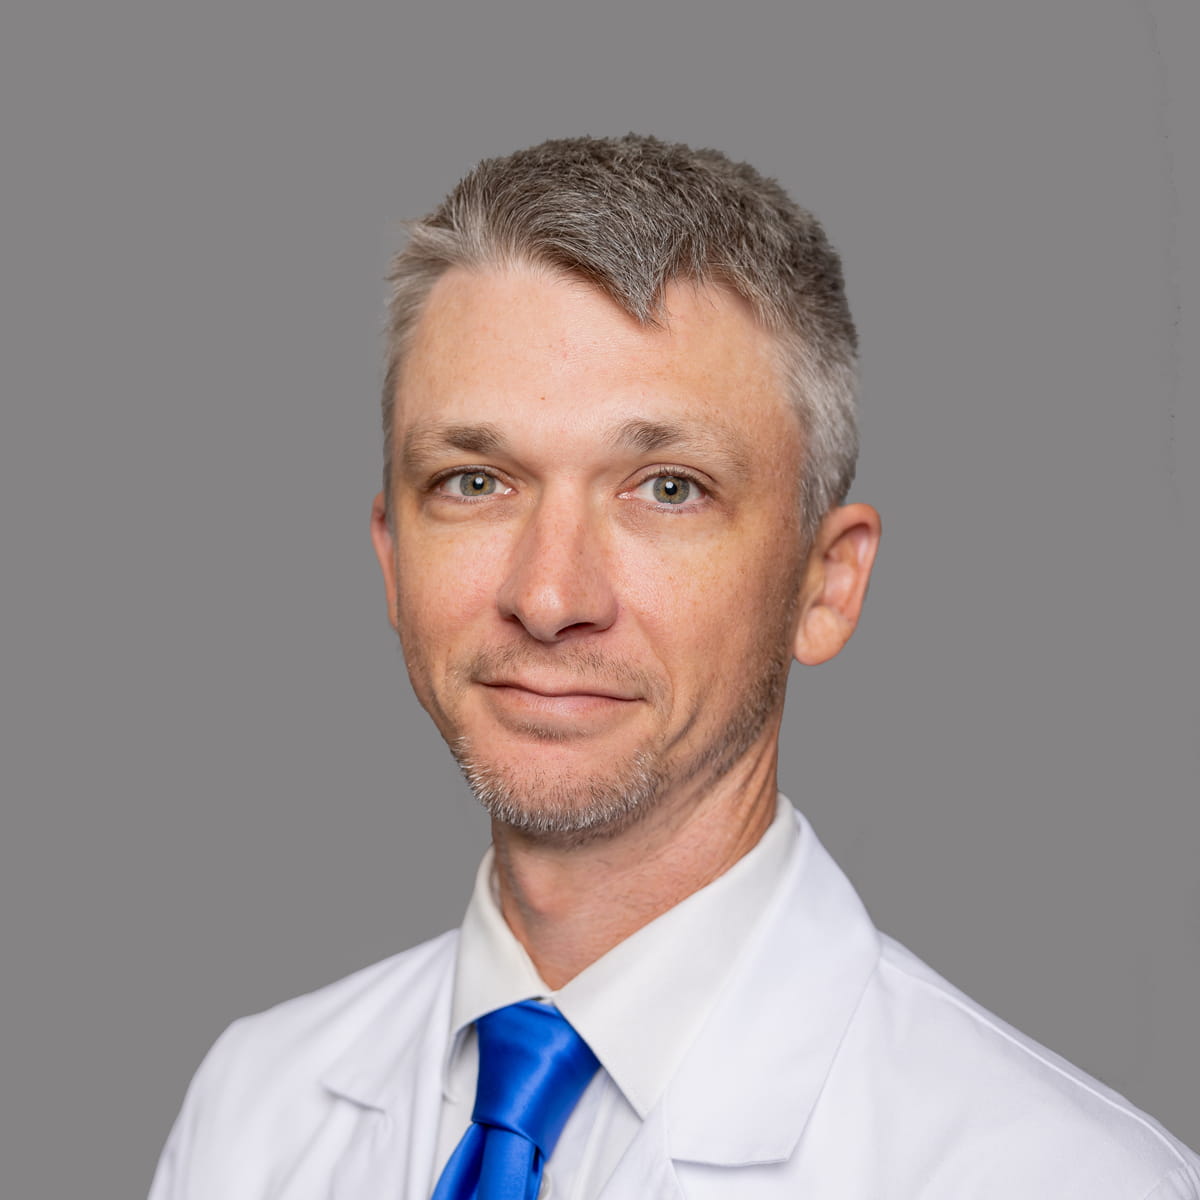 A friendly image of Justin Fincher MD